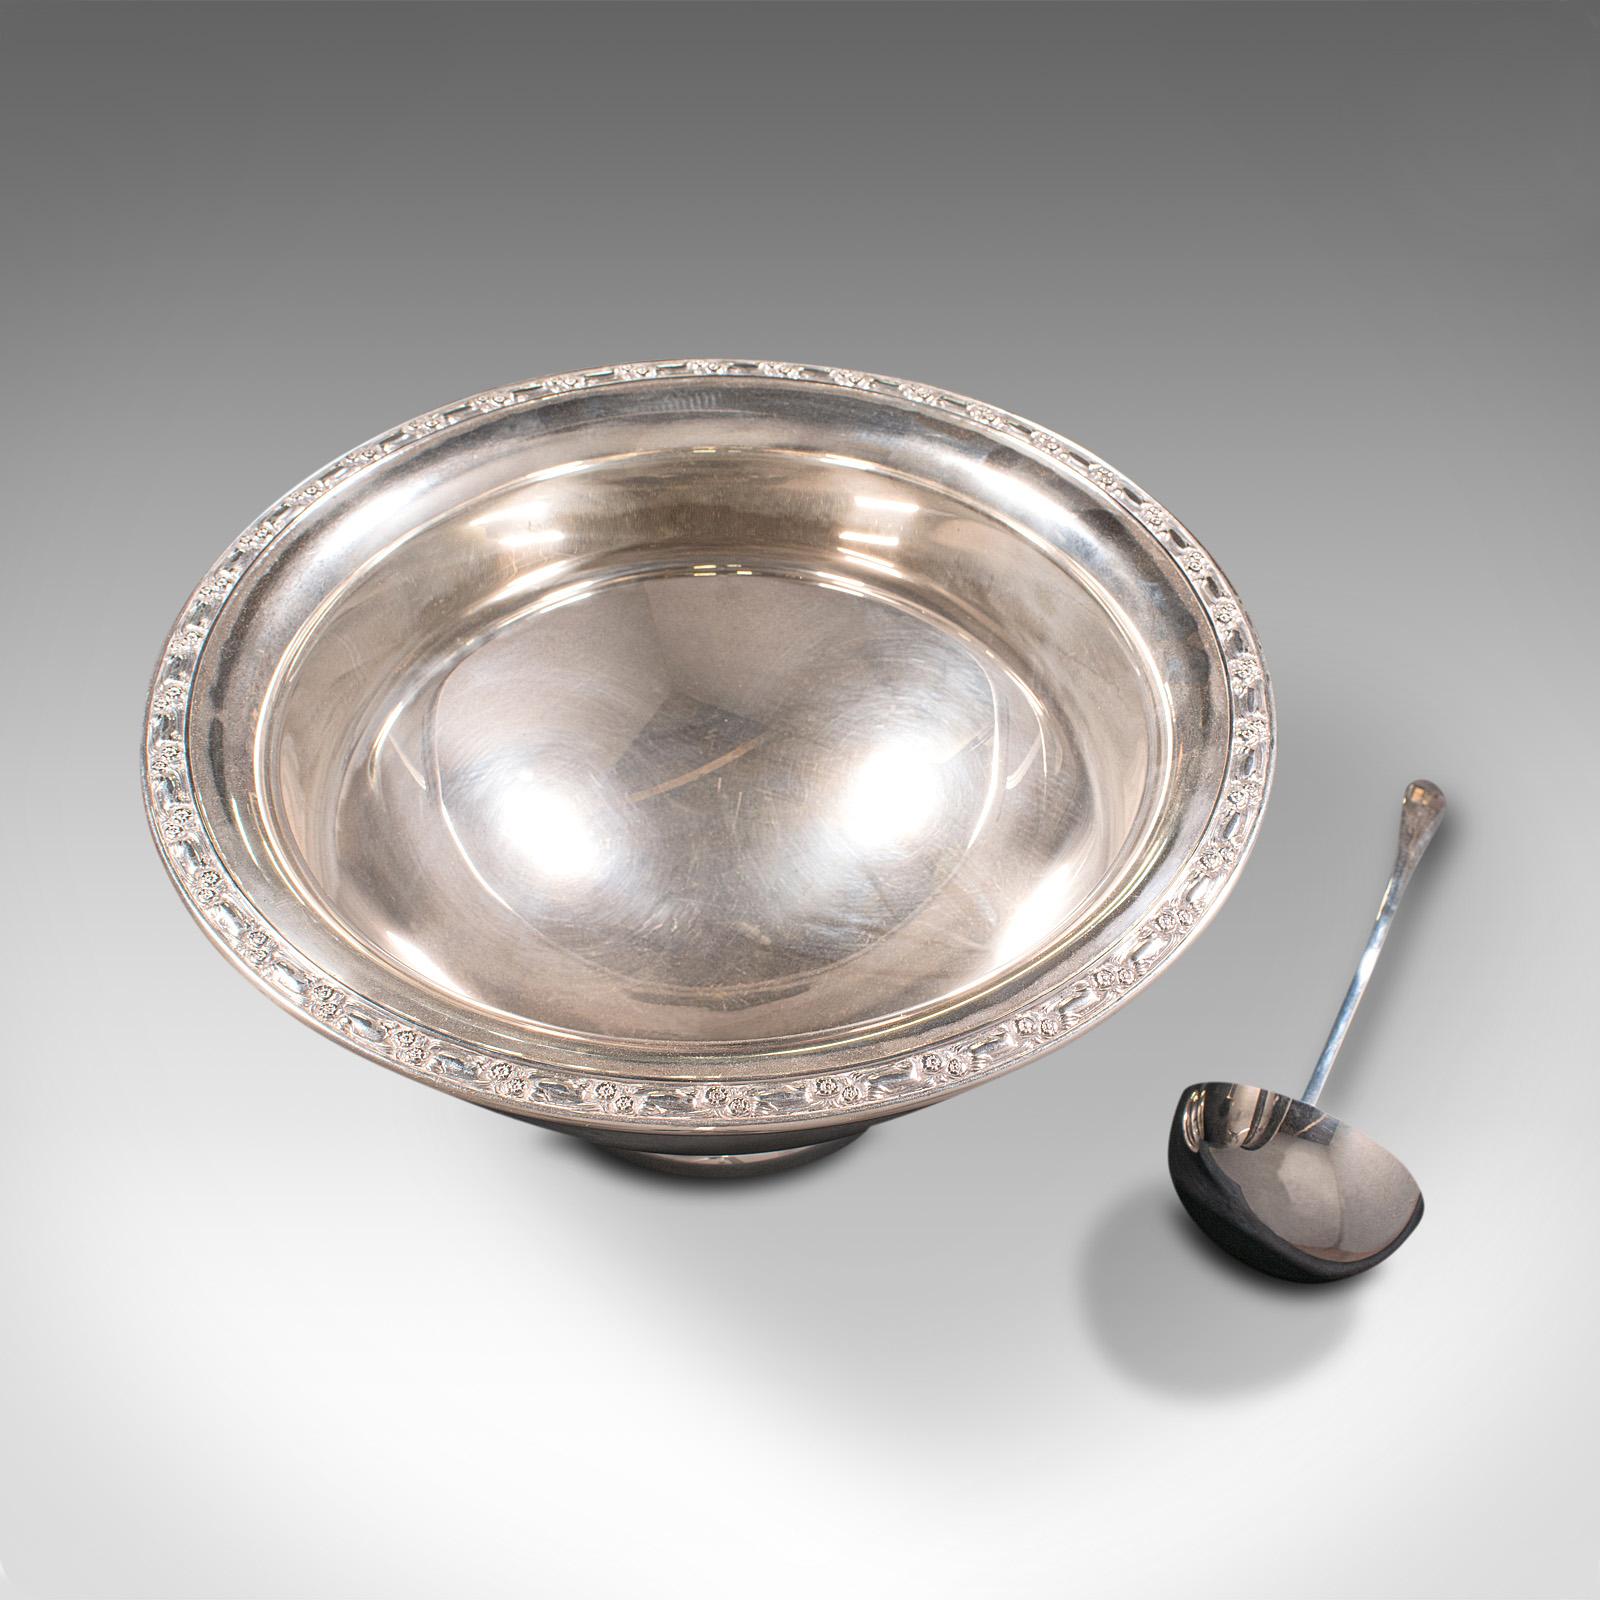 20th Century Vintage Punch Bowl, American, Silver Plate, Serving Dish, Spoon, Mid 20th C For Sale